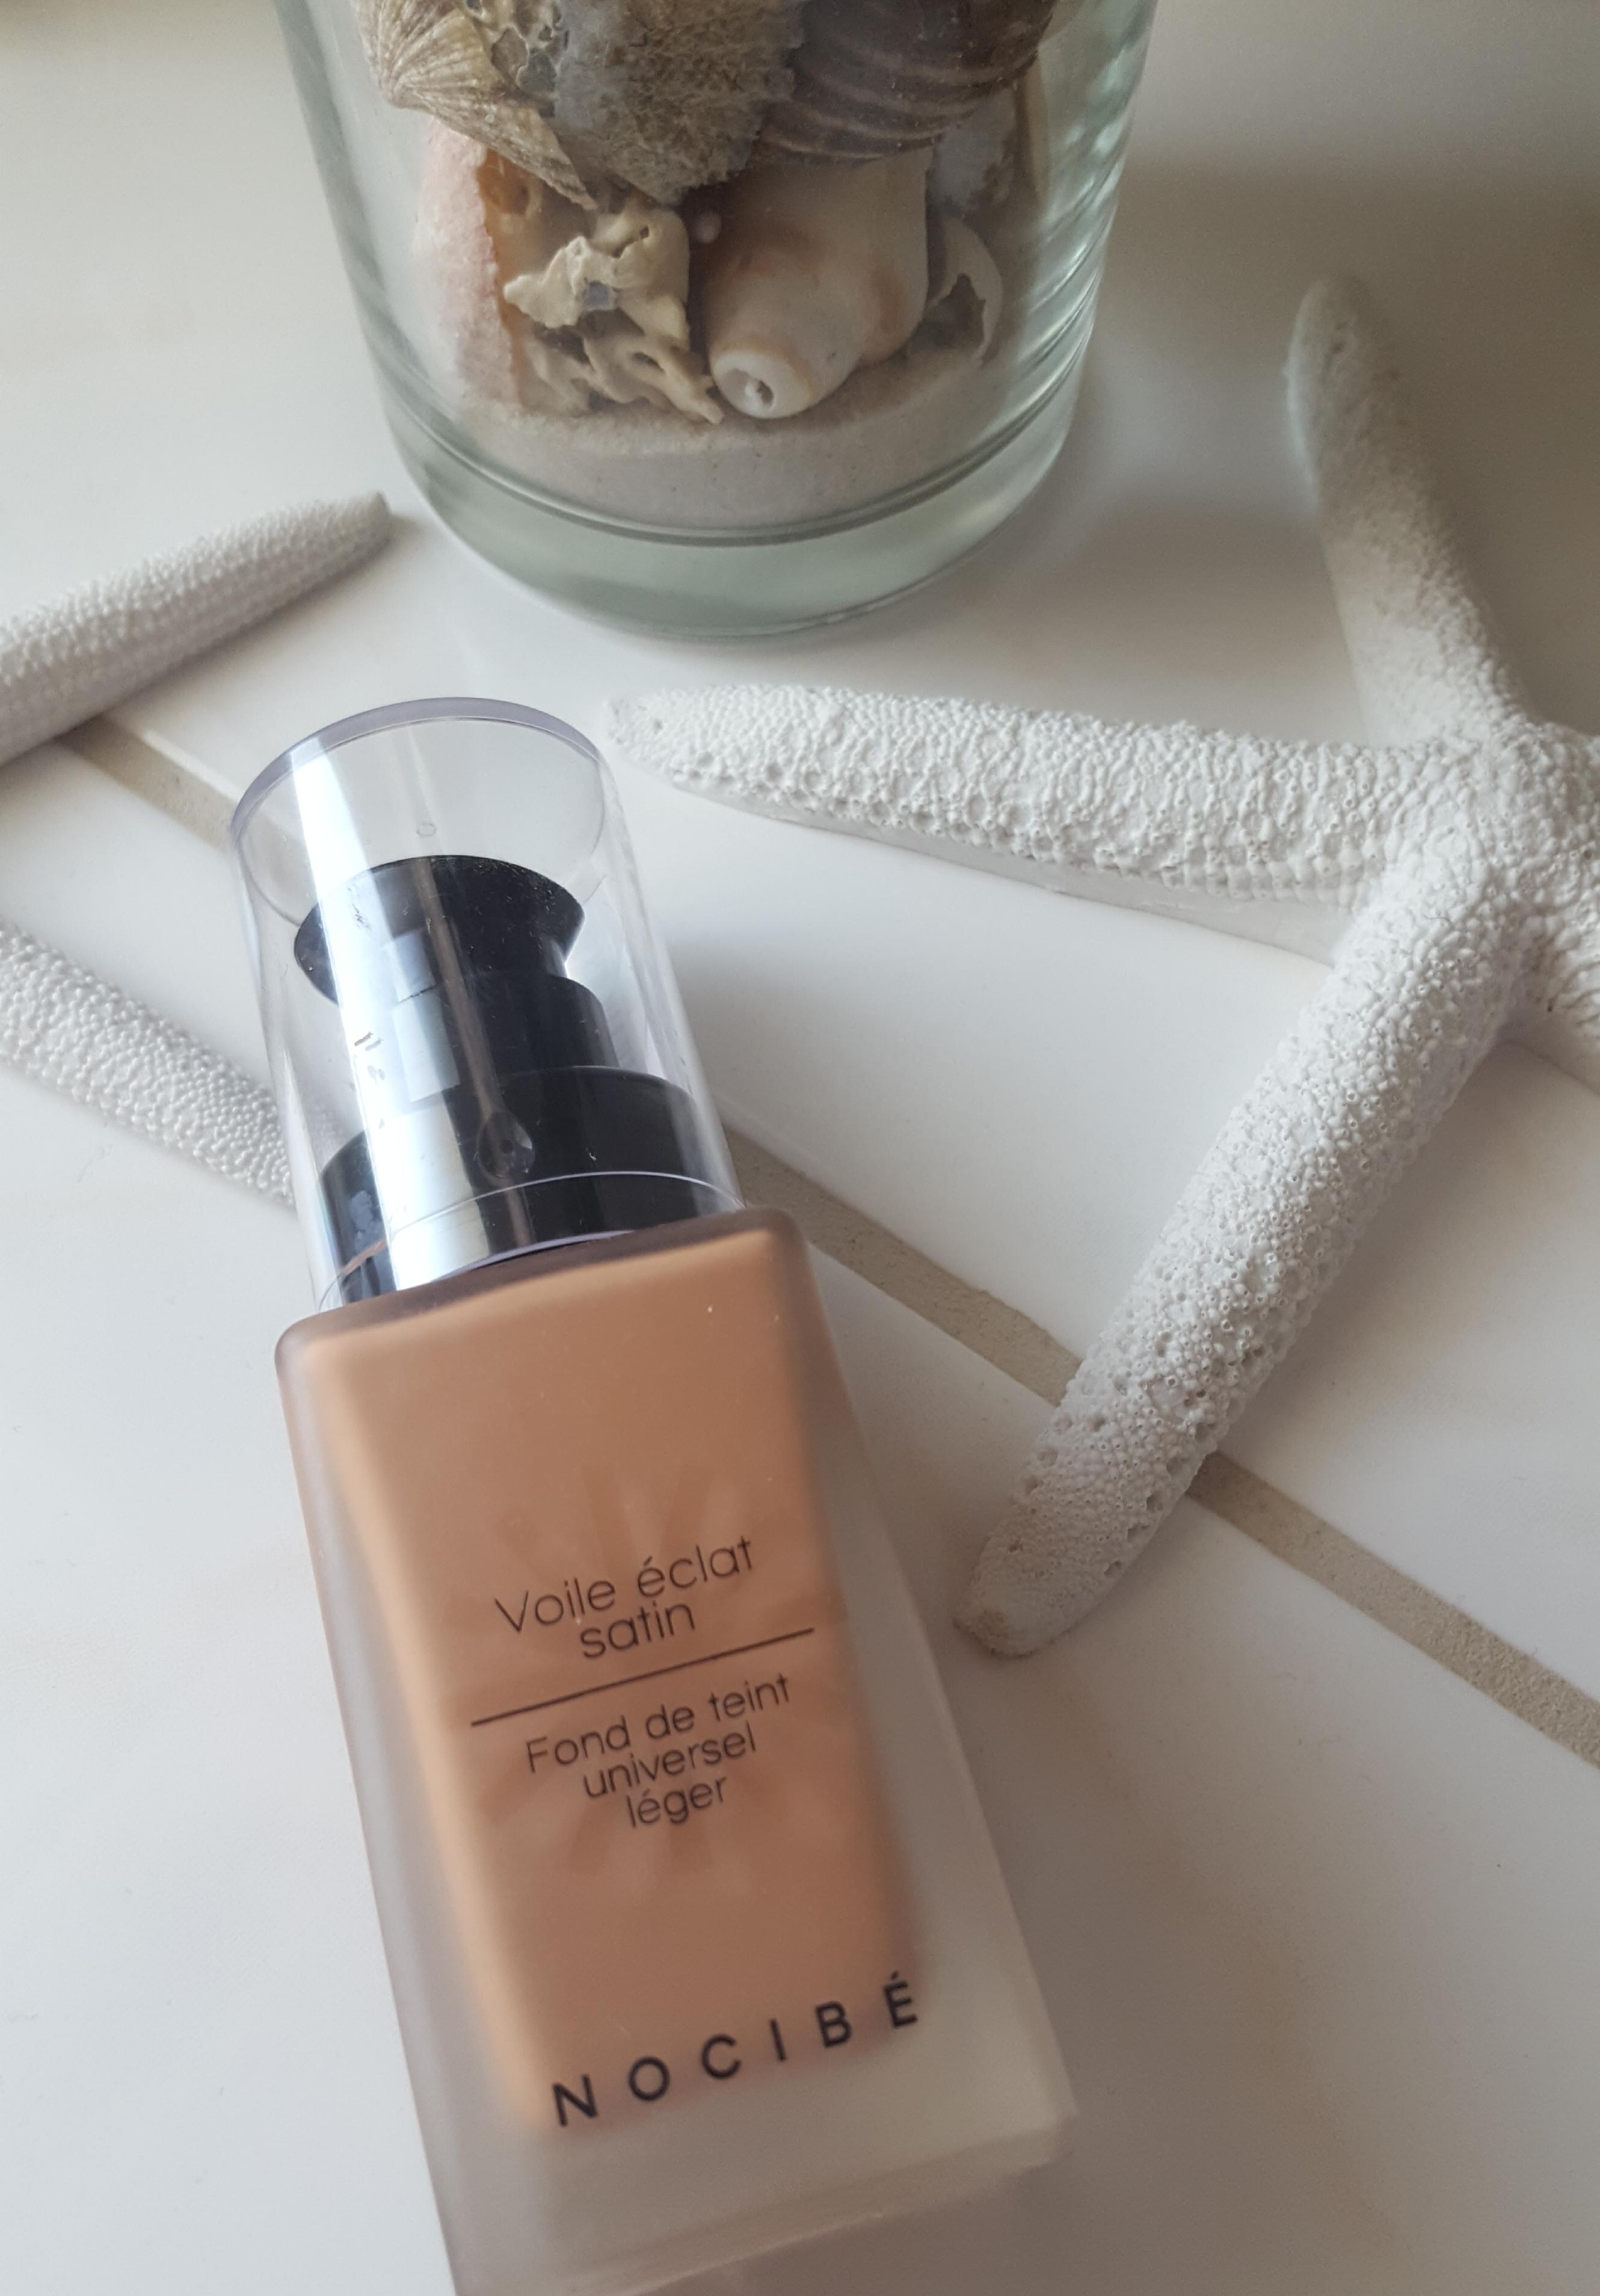 Love my new Foundation l bought in France♡
#foundation #nocibé #natural